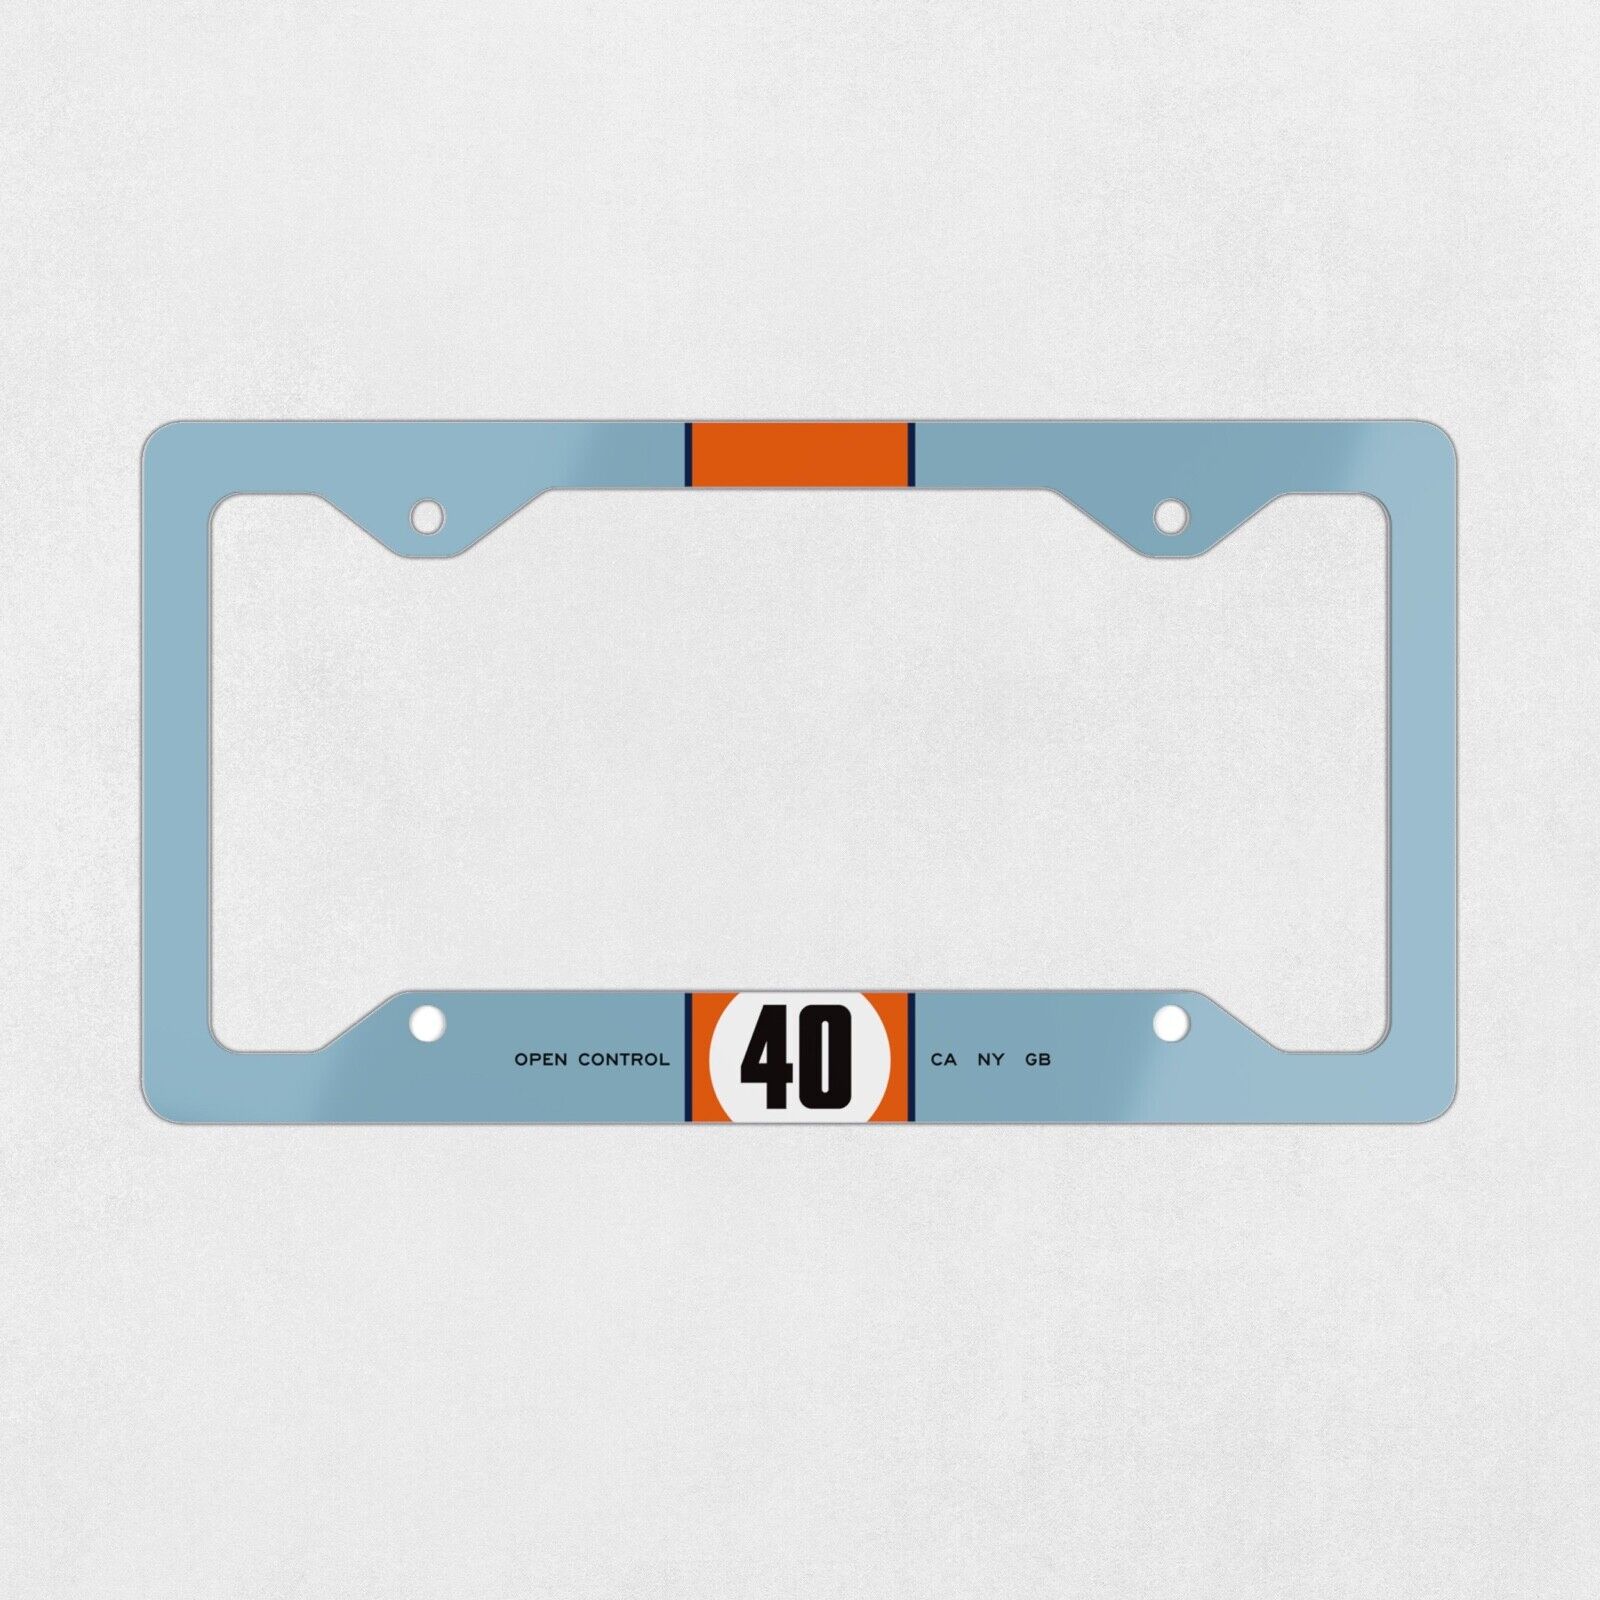 GULF RACING Mk1 metal license plate frame by LA's OPEN CONTROL Porsche/Ford GT40